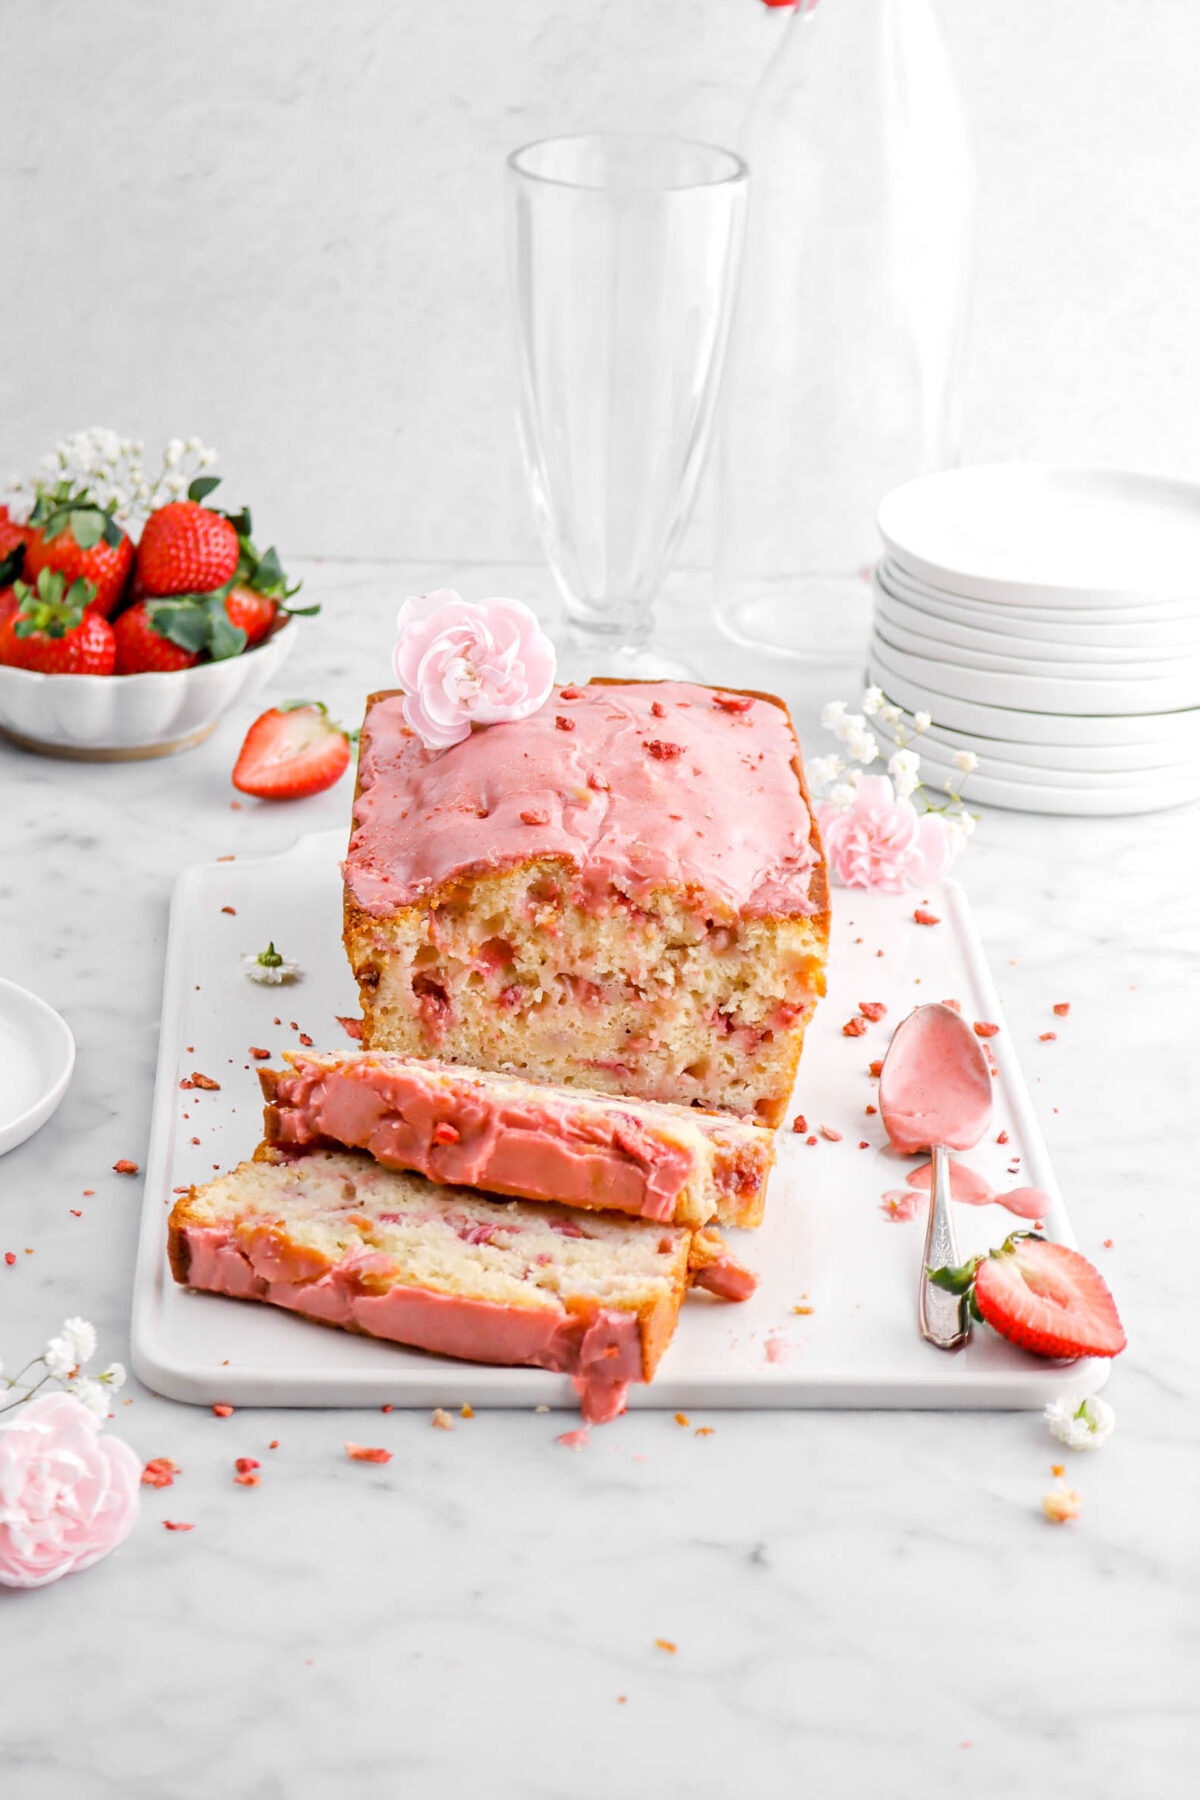 strawberry bread on white tray with two slices laying in front with flowers around and fresh strawberries, a stack of plates and two empty glasses behind.